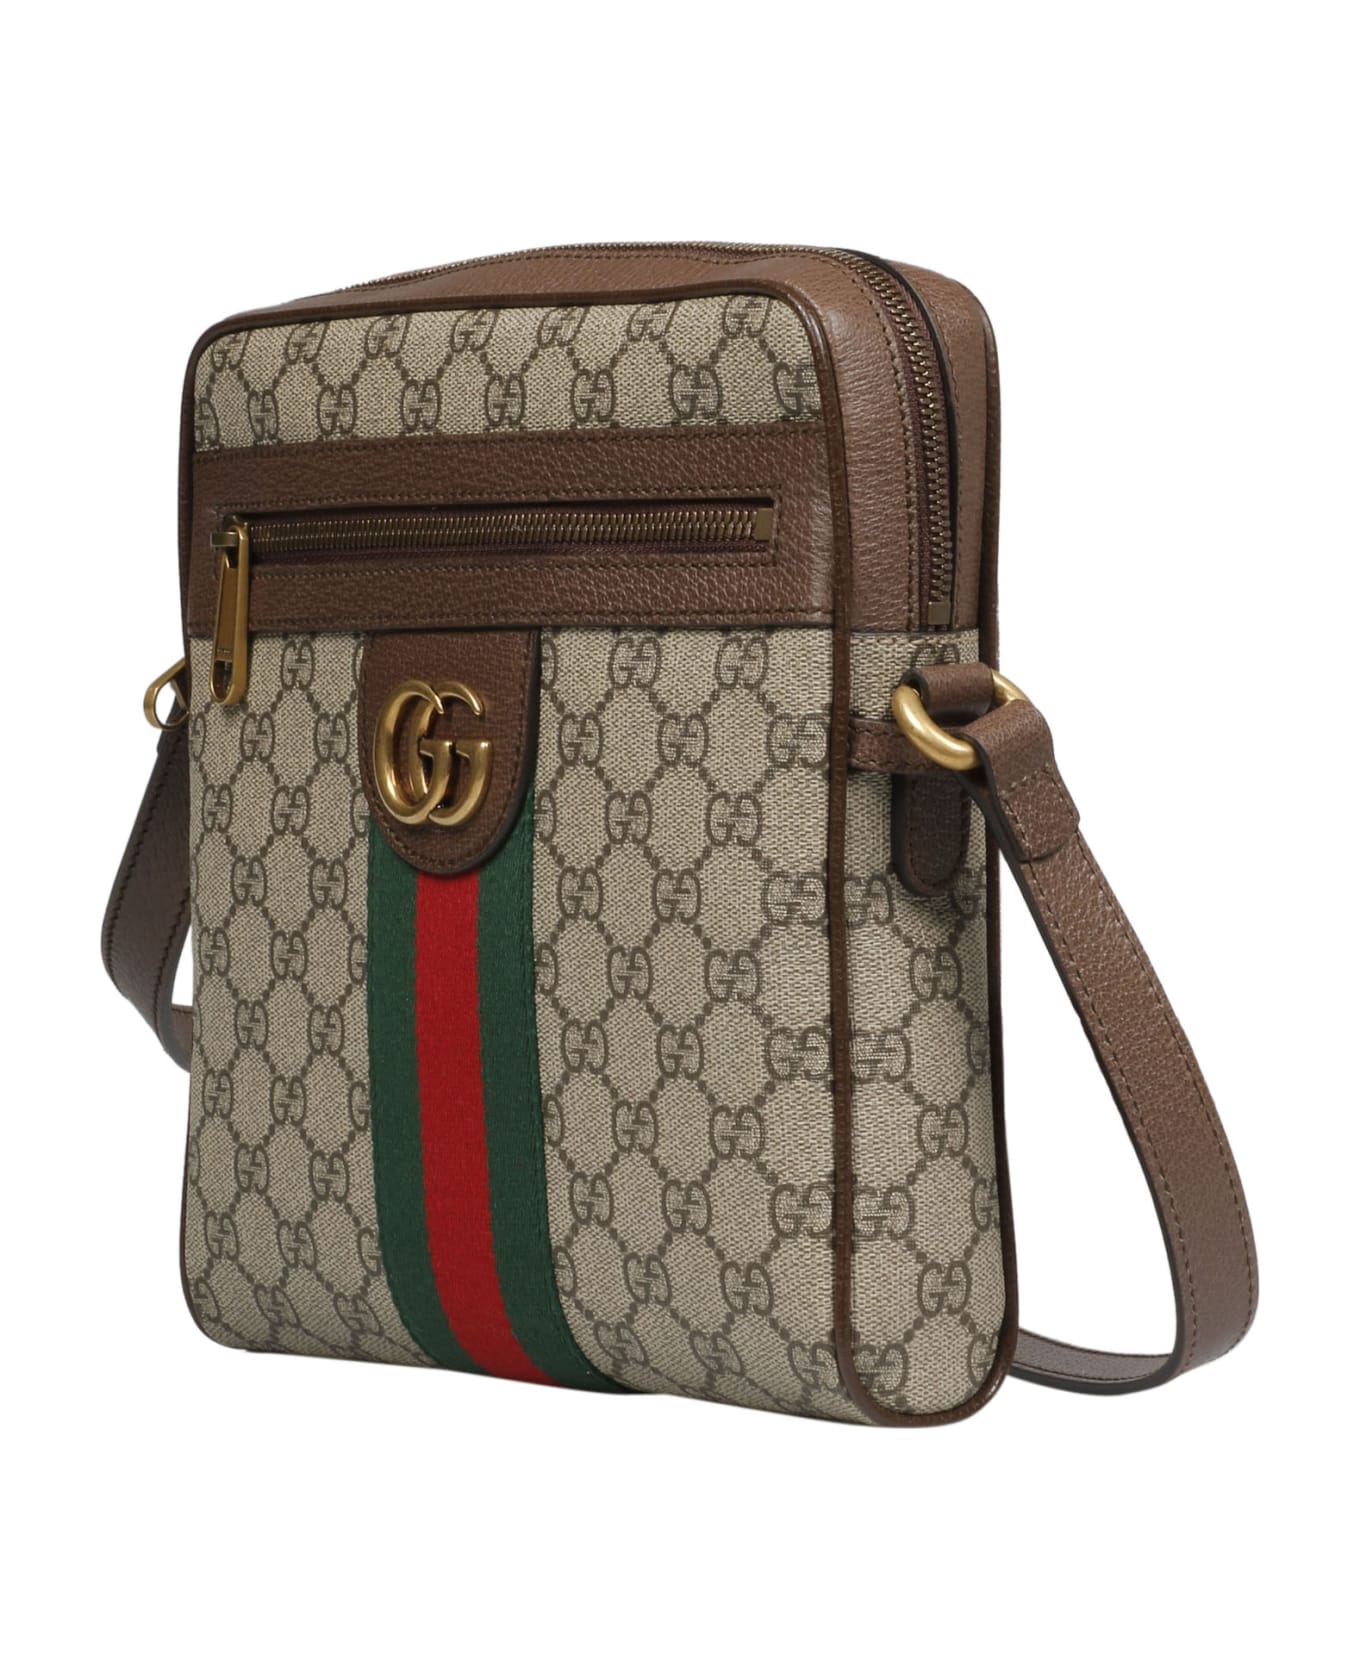 Gucci Ophidia Gg Small Shoulder Bag | italist